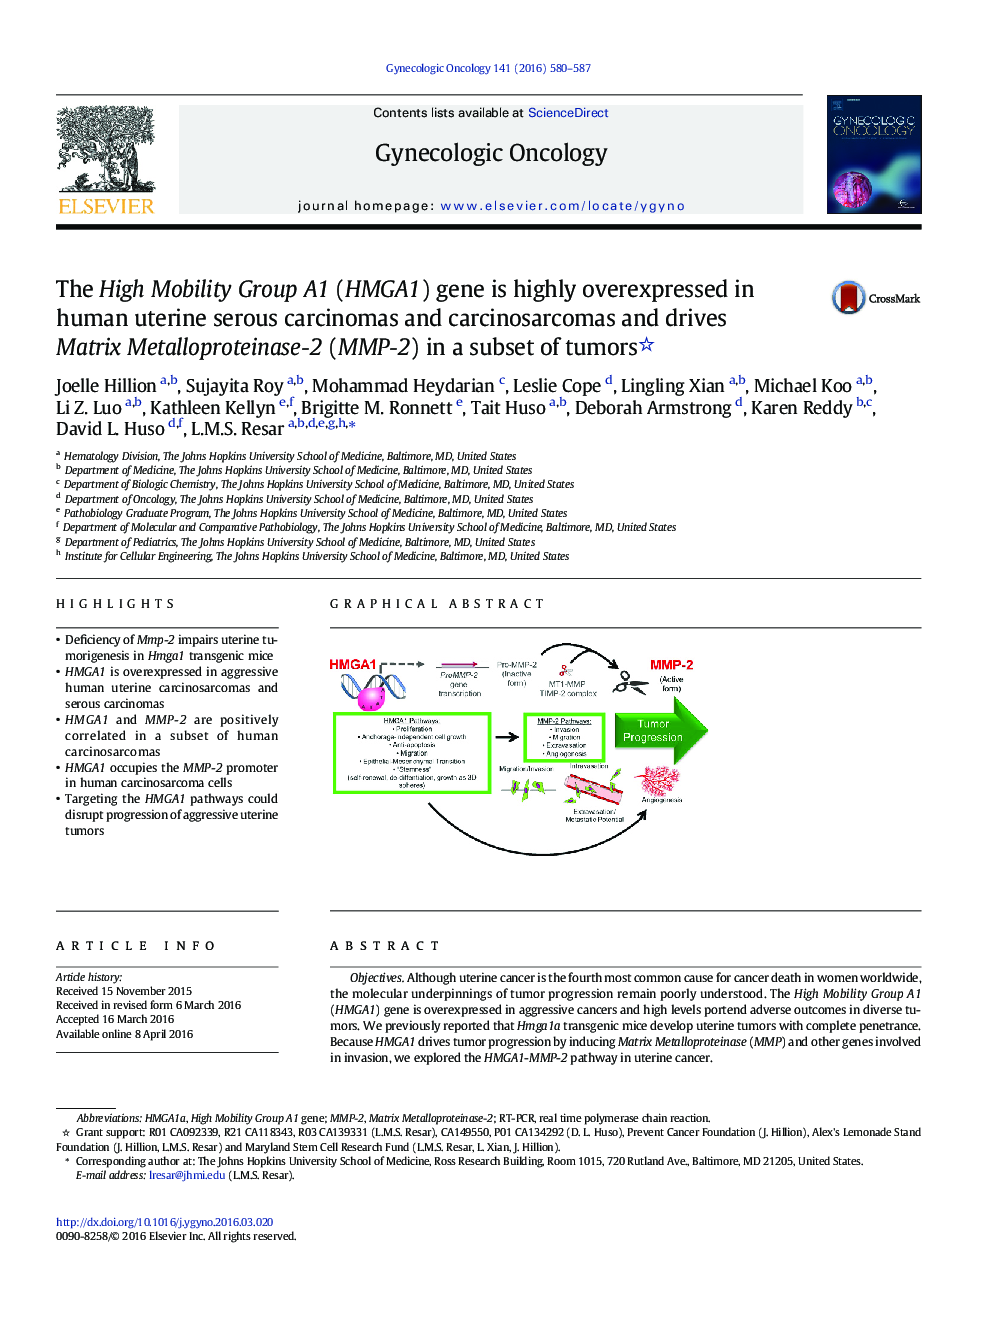 The High Mobility Group A1 (HMGA1) gene is highly overexpressed in human uterine serous carcinomas and carcinosarcomas and drives Matrix Metalloproteinase-2 (MMP-2) in a subset of tumors 